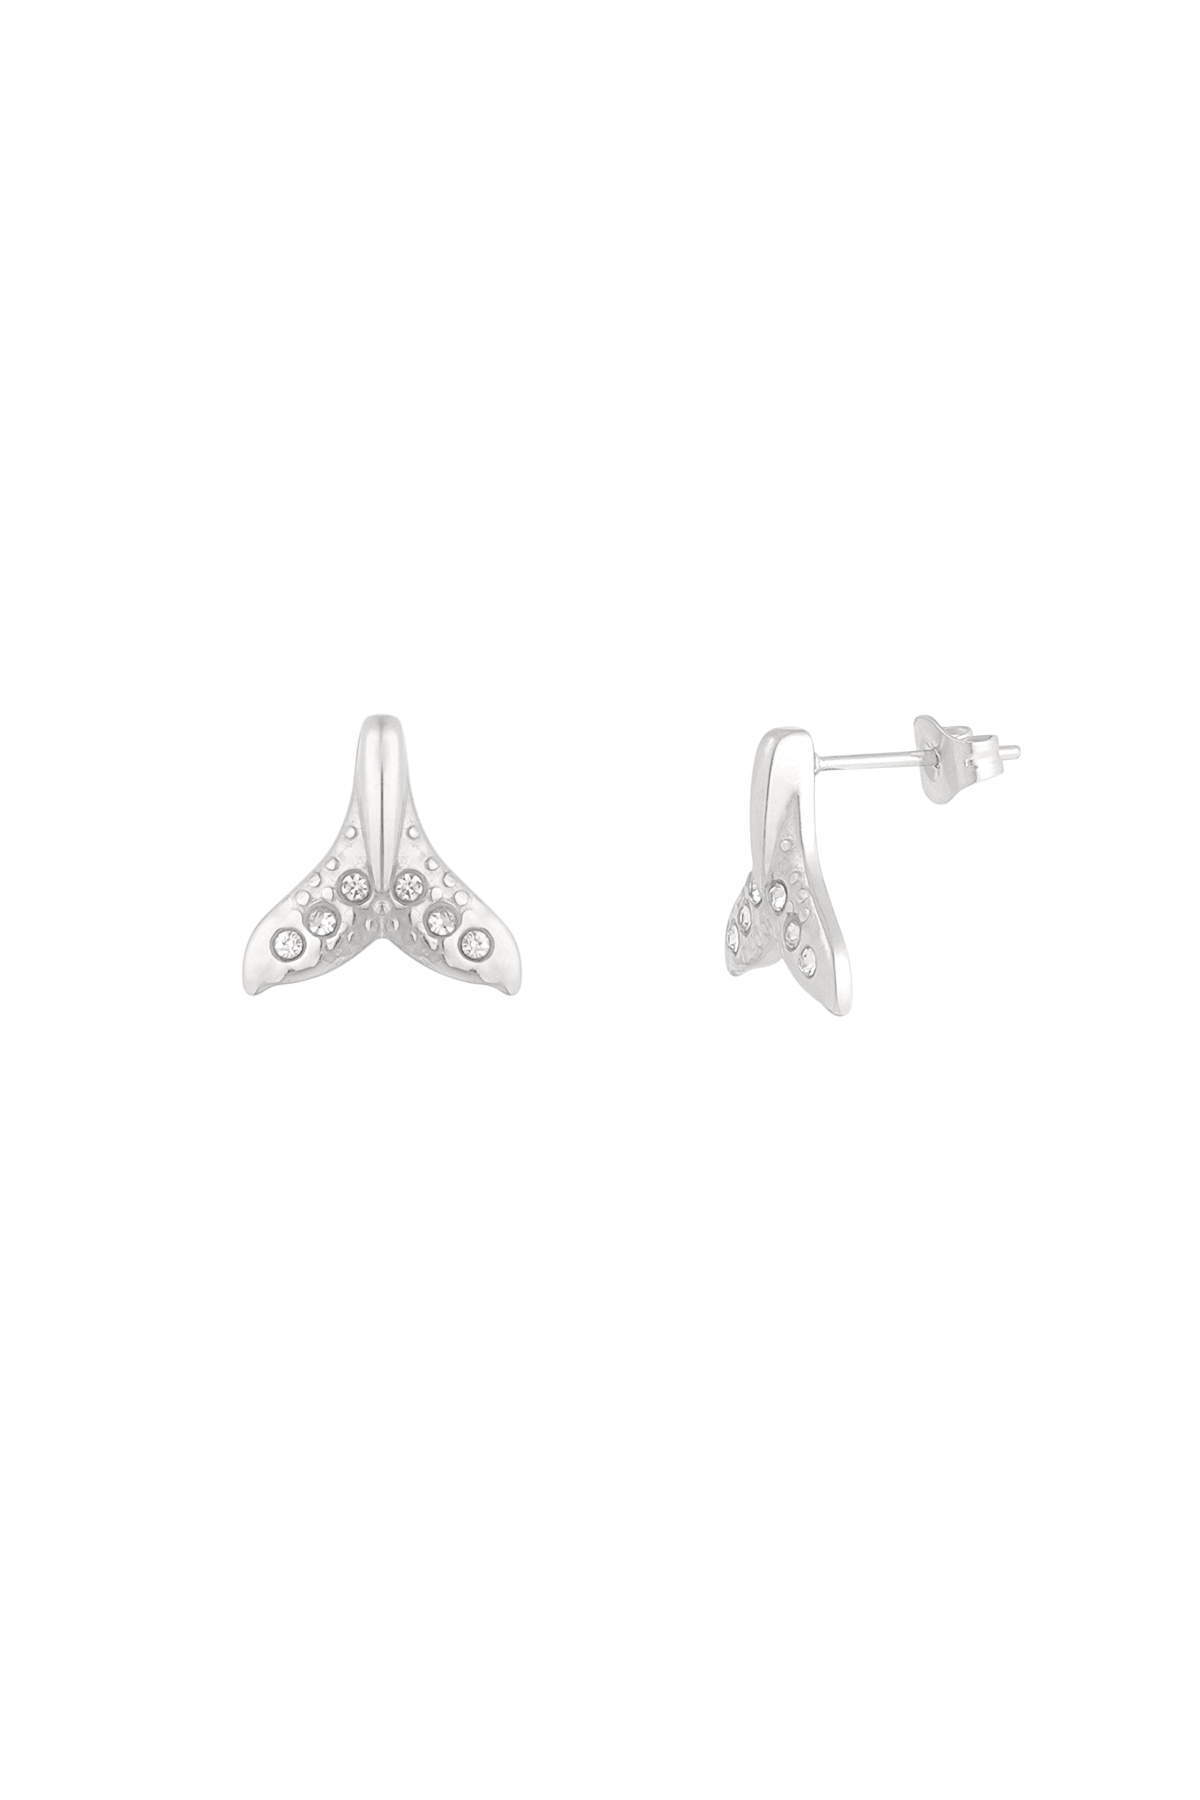 Earrings whale tail - silver h5 